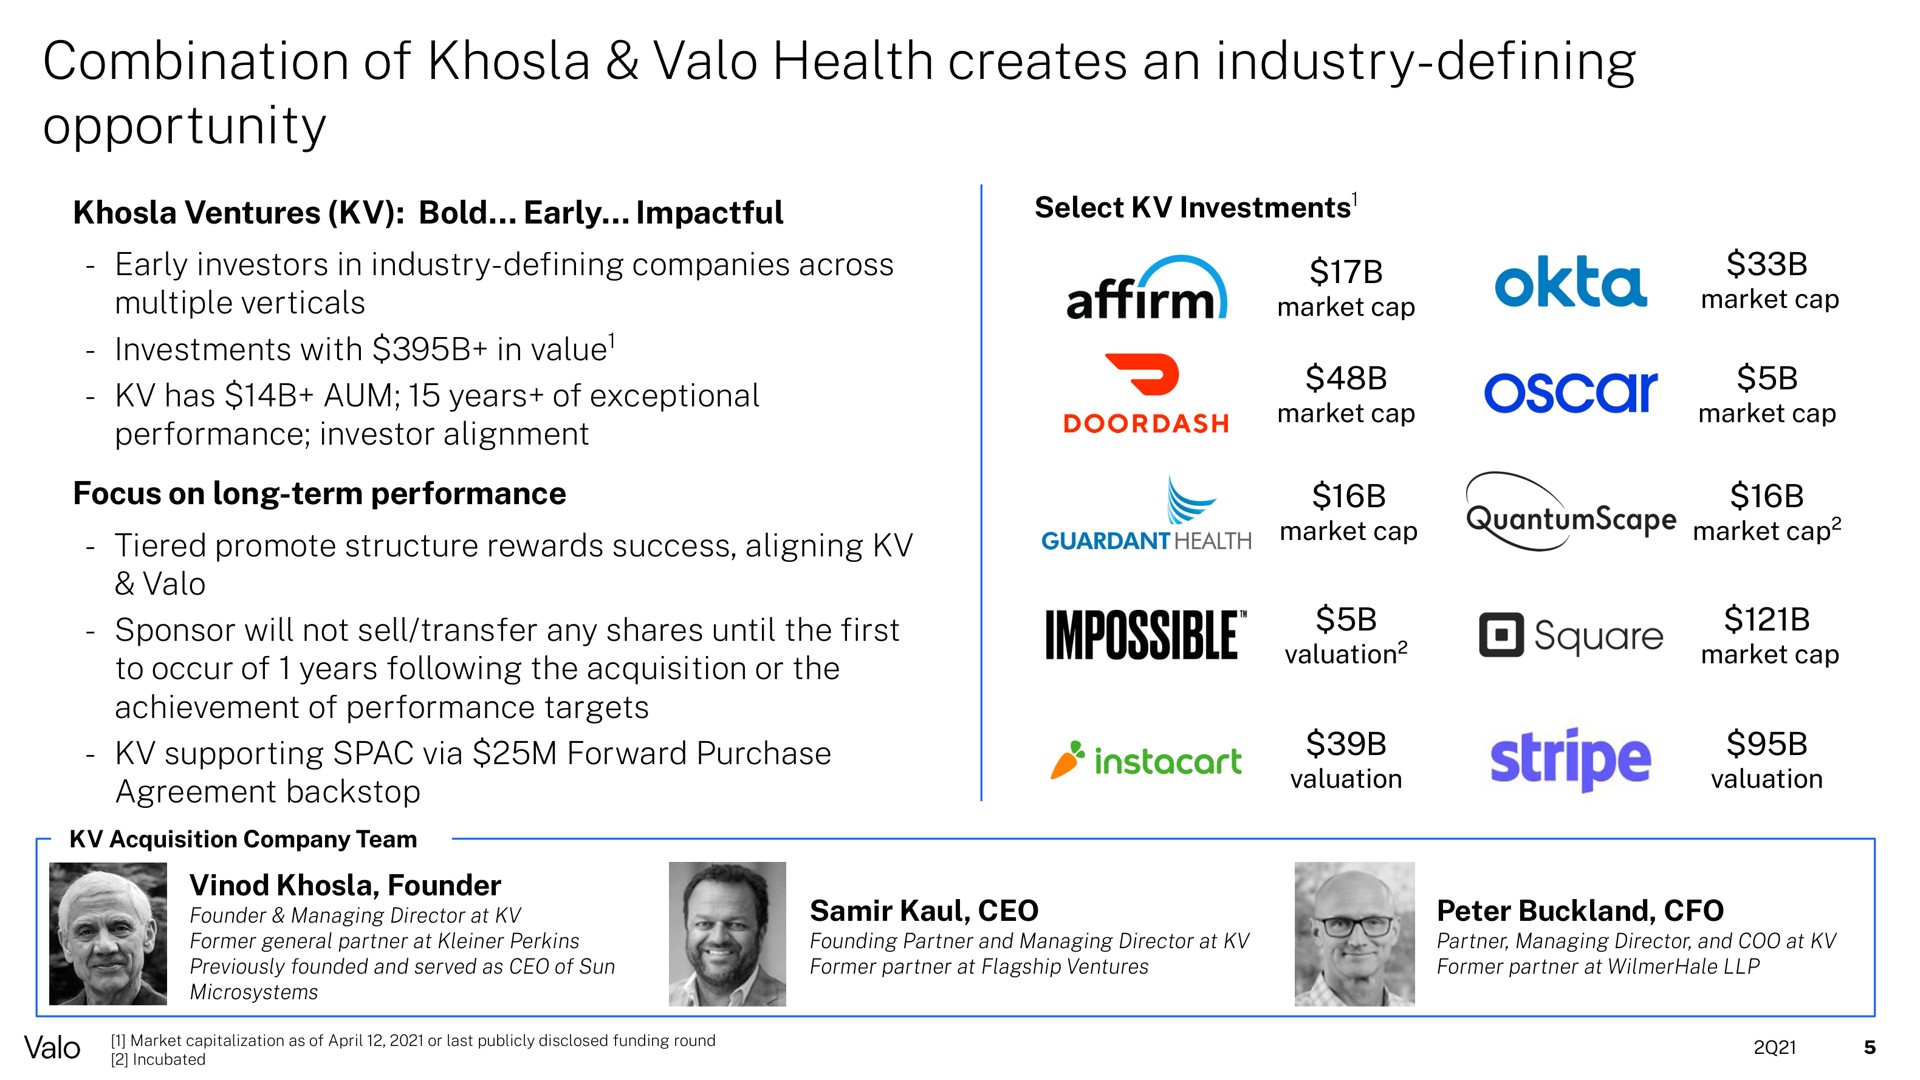 combination of health creates an industry opportunity industry defining impossible cap stripe | Valo